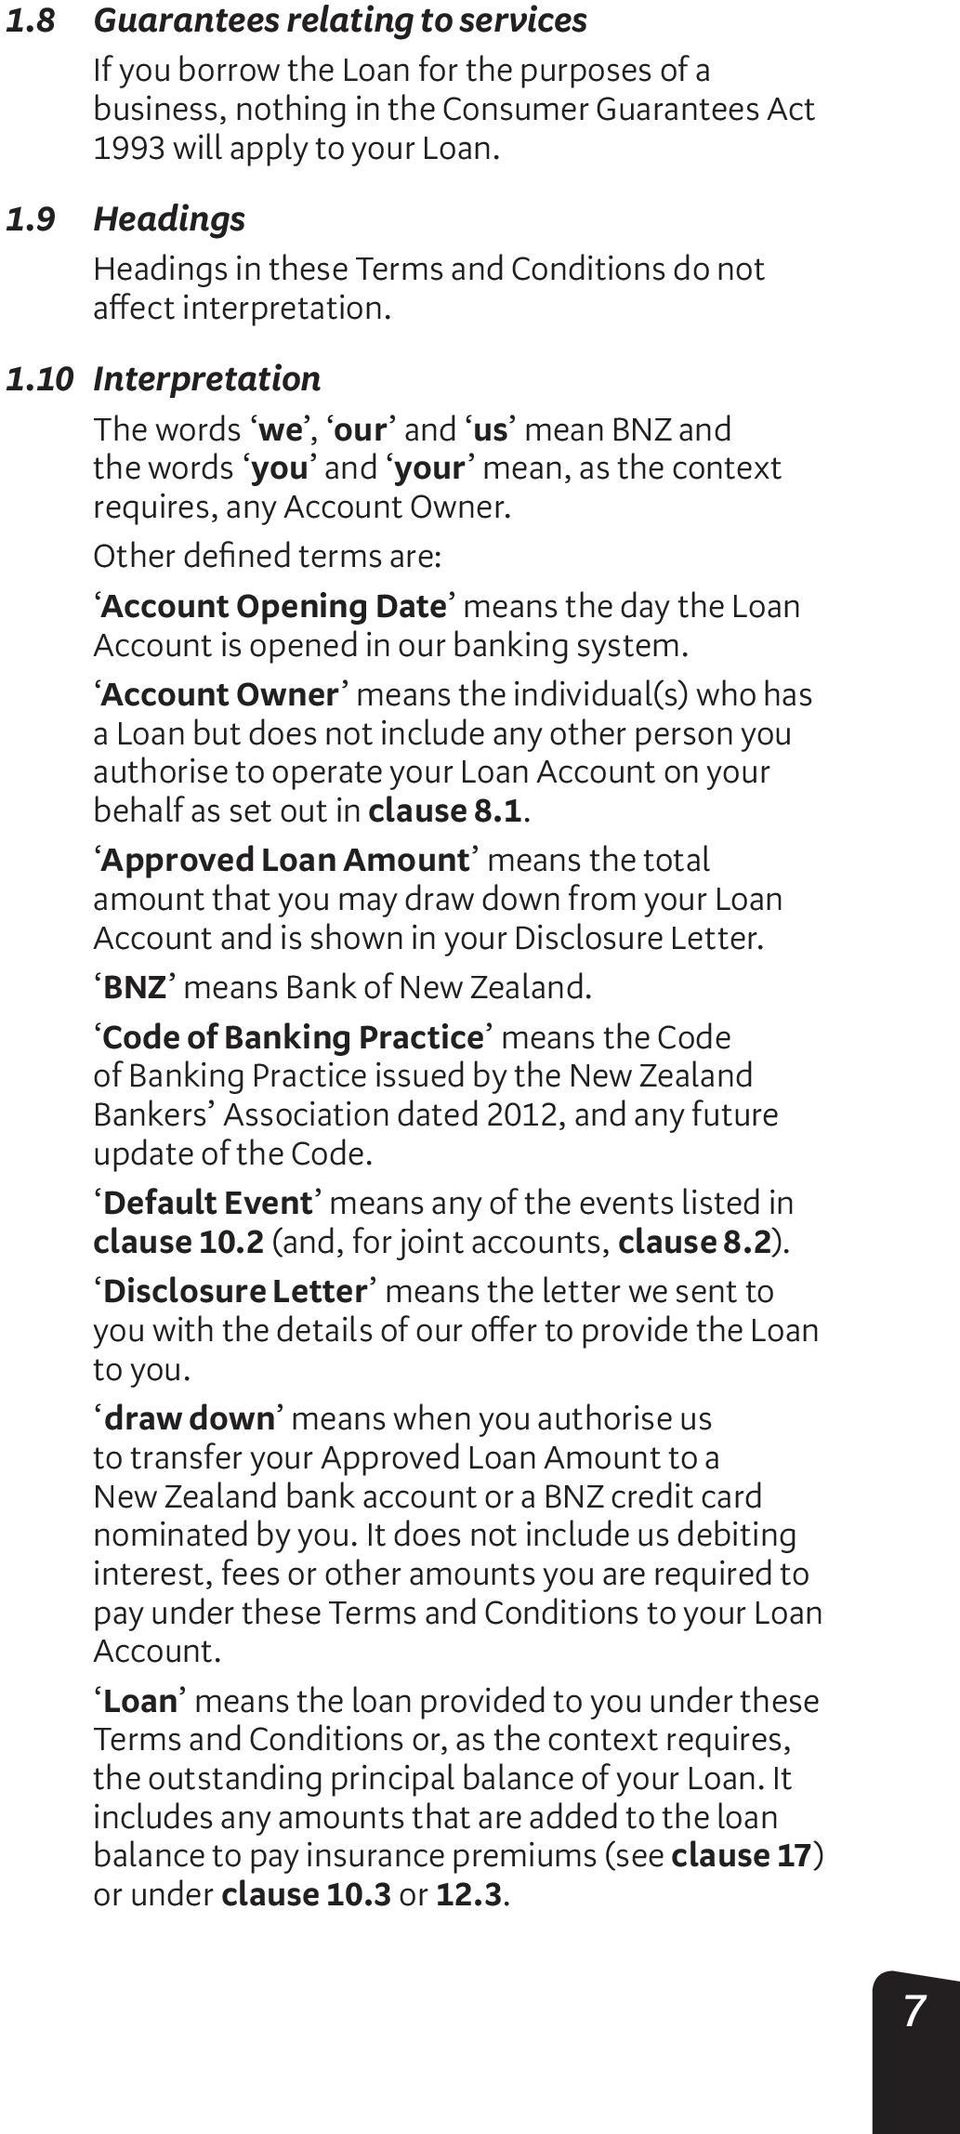 Other defined terms are: Account Opening Date means the day the Loan Account is opened in our banking system.